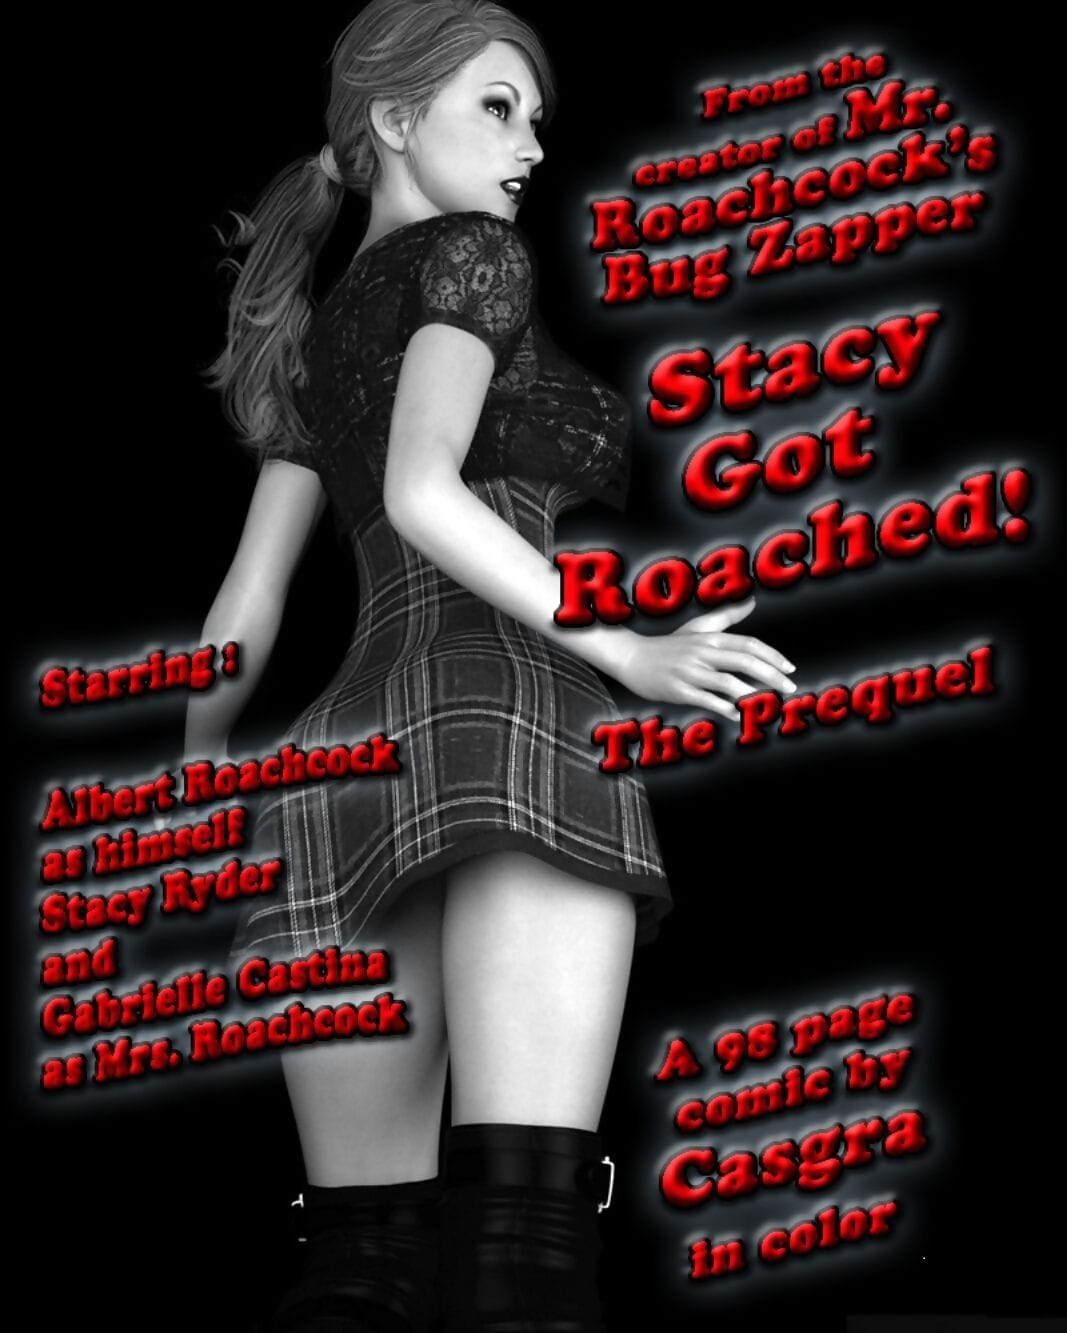 casgra Stacy Ottenuto roached page 1